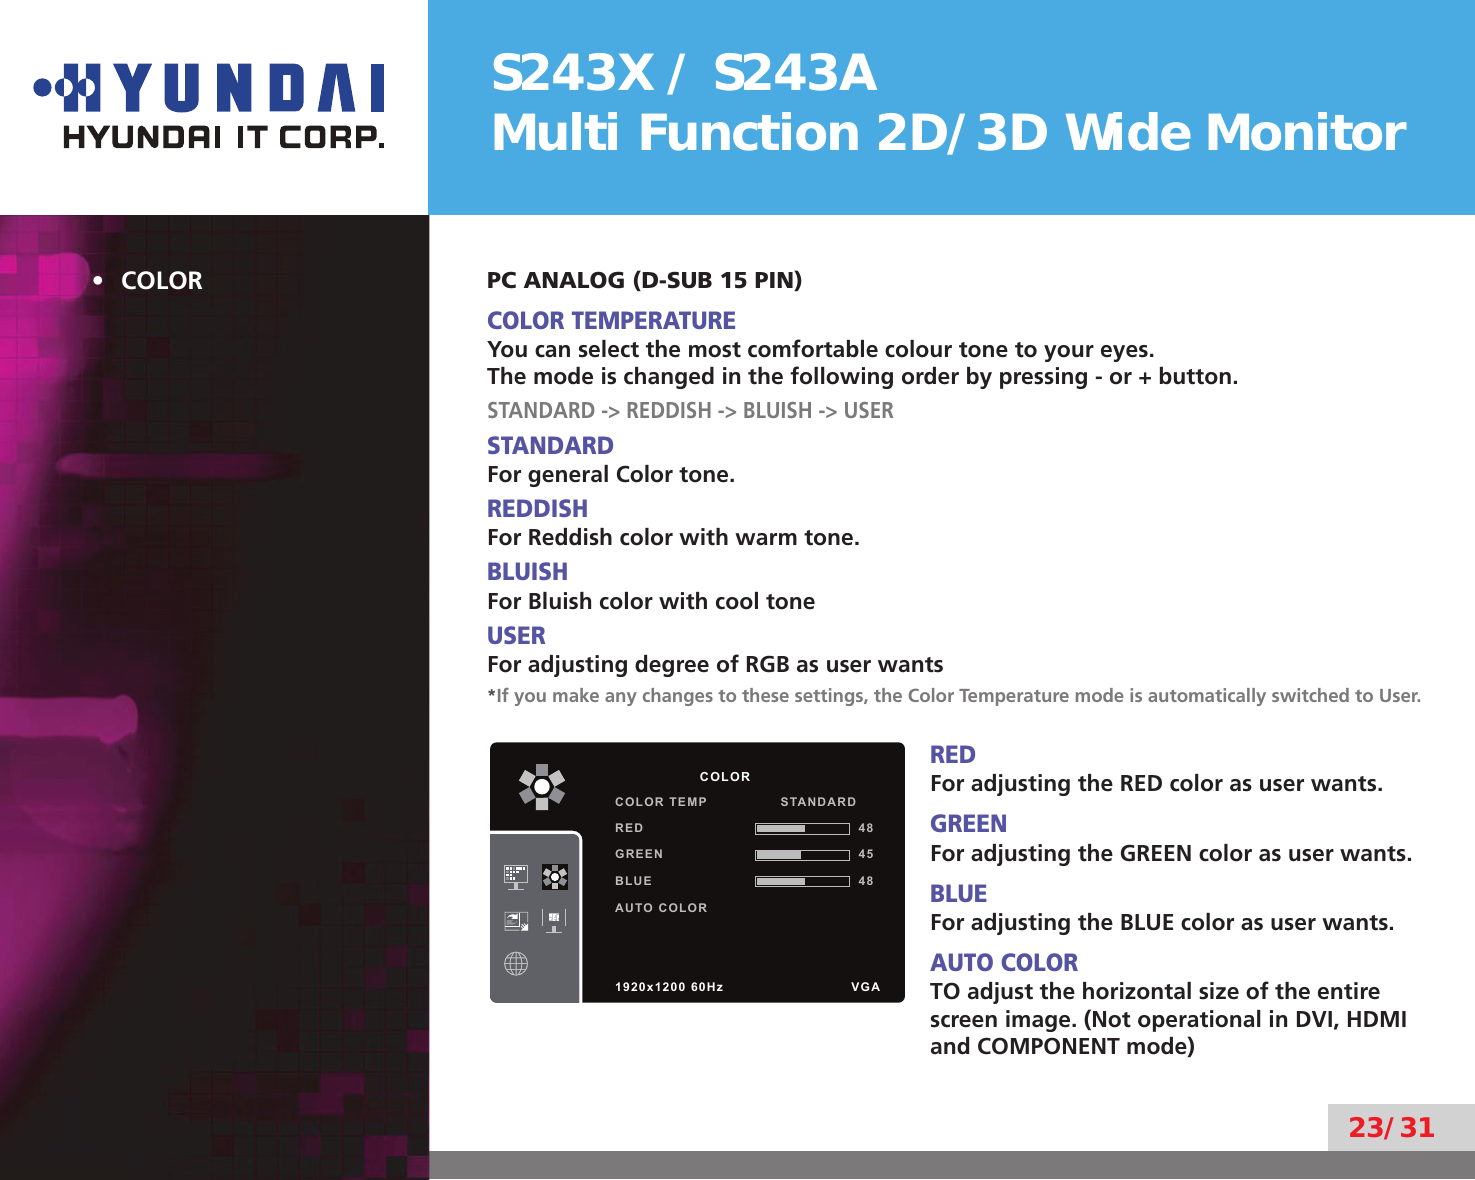 S243X / S243AMulti Function 2D/3D Wide Monitor23/31COLOR• PC ANALOG (D-SUB 15 PIN)COLOR TEMPERATUREYou can select the most comfortable colour tone to your eyes.The mode is changed in the following order by pressing - or + button.STANDARD -&gt; REDDISH -&gt; BLUISH -&gt; USERSTANDARDFor general Color tone.REDDISHFor Reddish color with warm tone.BLUISHFor Bluish color with cool toneUSERFor adjusting degree of RGB as user wants*If you make any changes to these settings, the Color Temperature mode is automatically switched to User.REDFor adjusting the RED color as user wants.GREENFor adjusting the GREEN color as user wants.BLUEFor adjusting the BLUE color as user wants.AUTO COLORTO adjust the horizontal size of the entire screen image. (Not operational in DVI, HDMI and COMPONENT mode)          COLORCOLOR TEMP                STANDARDRED 48GREEN 45BLUE 48AUTO COLOR1920x1200 60Hz               VGA